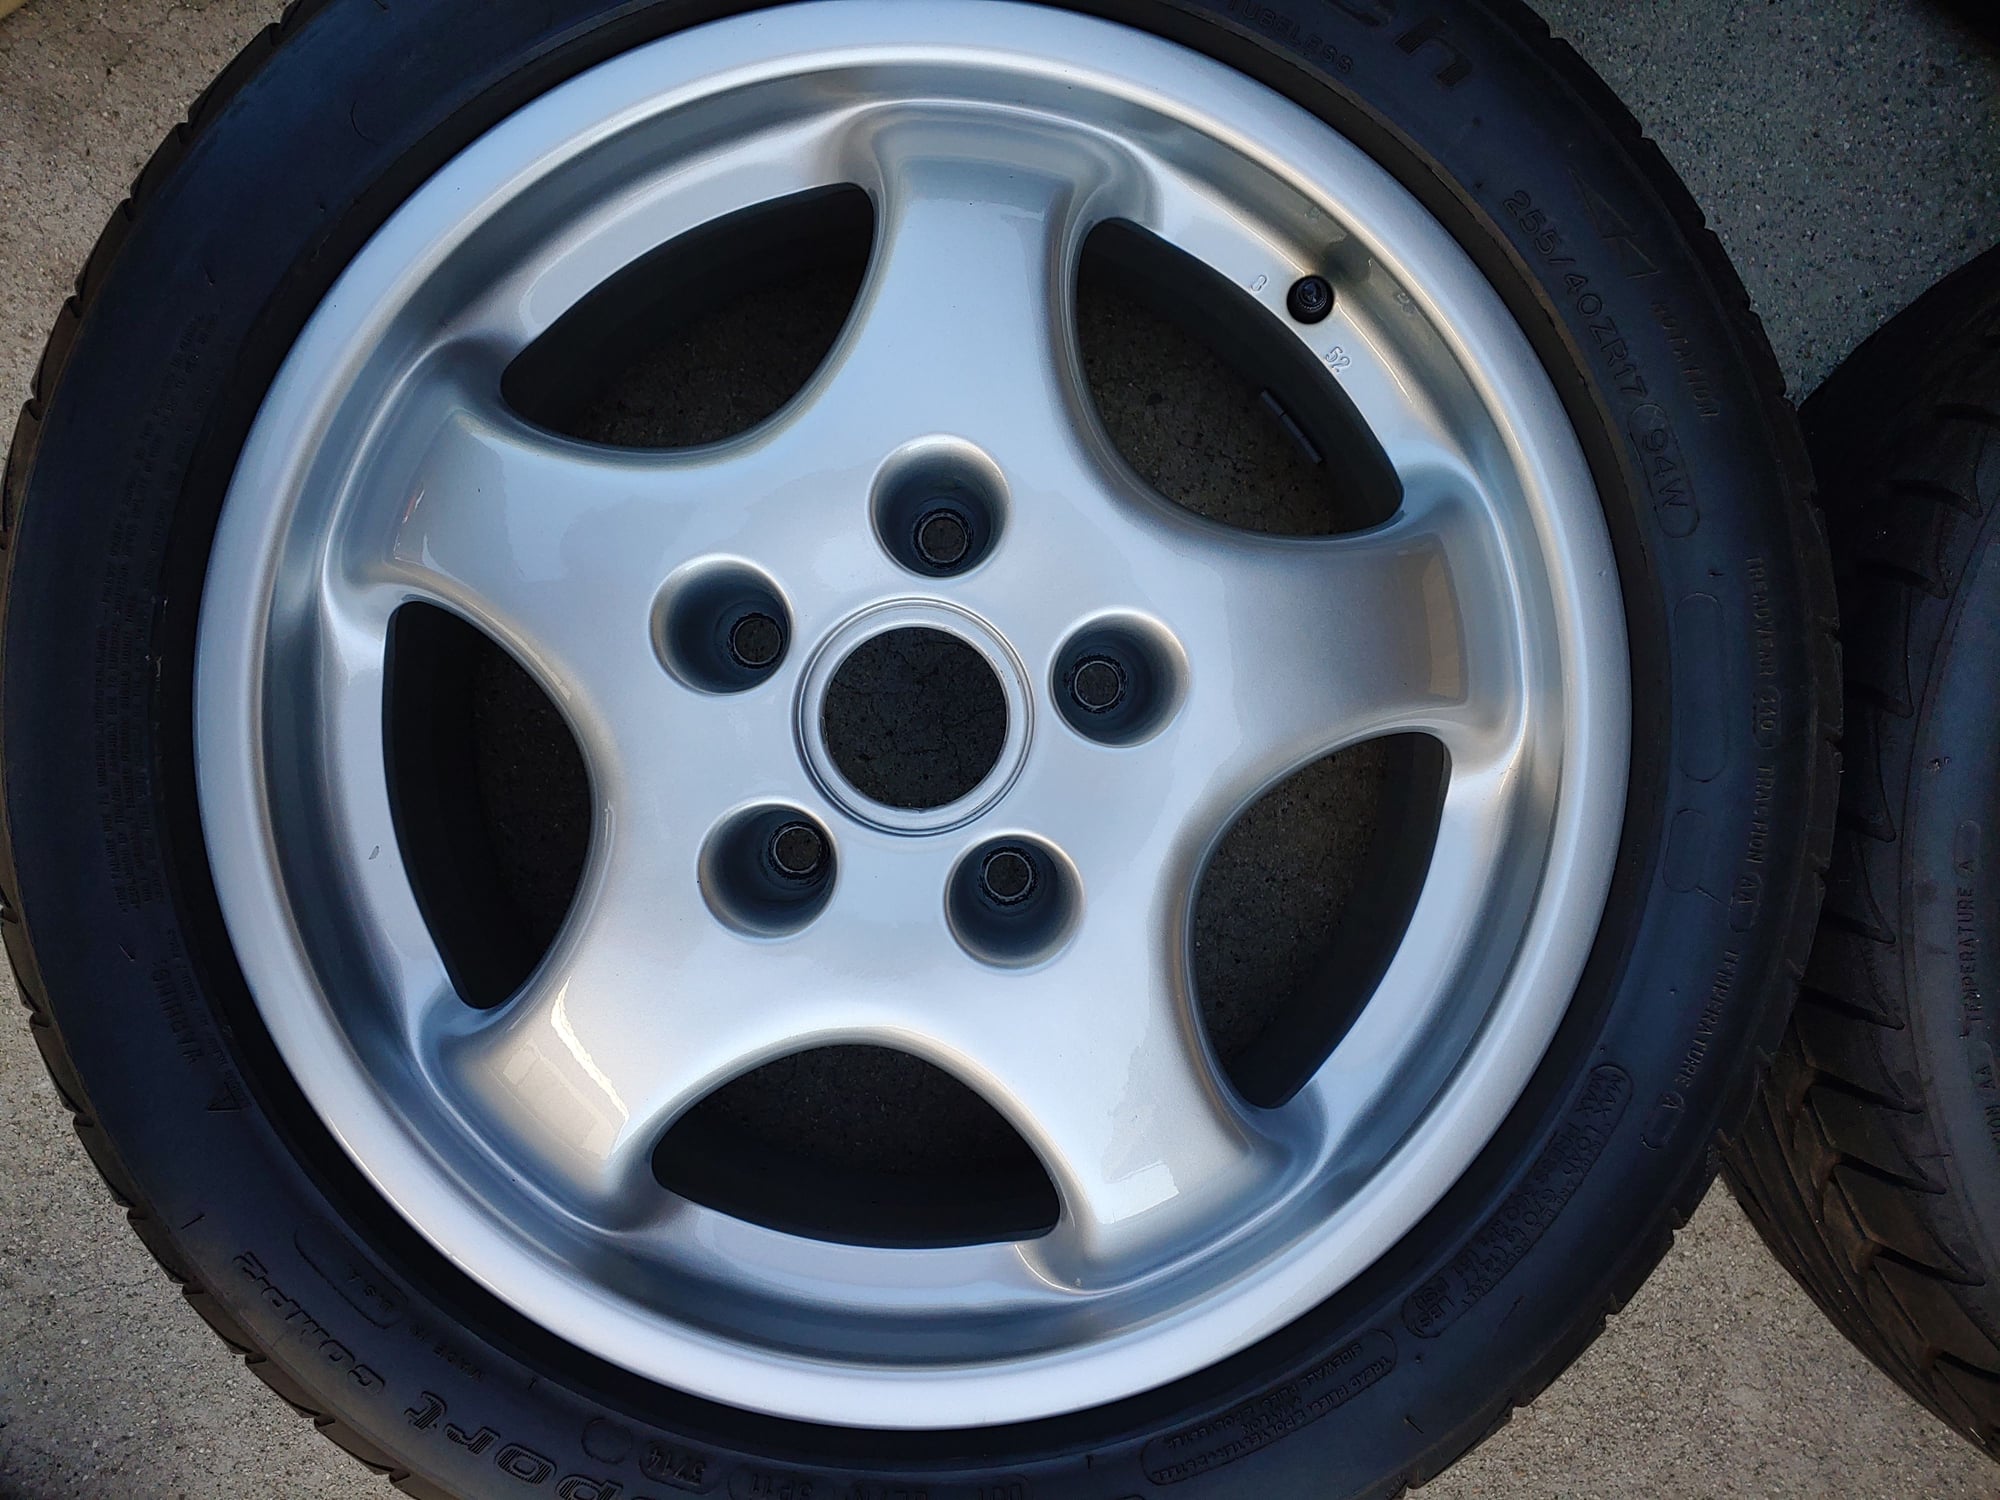 Wheels and Tires/Axles - FS: OEM 17" Cup 1 wheels from RS America - Los Angeles, CA - Used - Los Angeles, CA 90240, United States